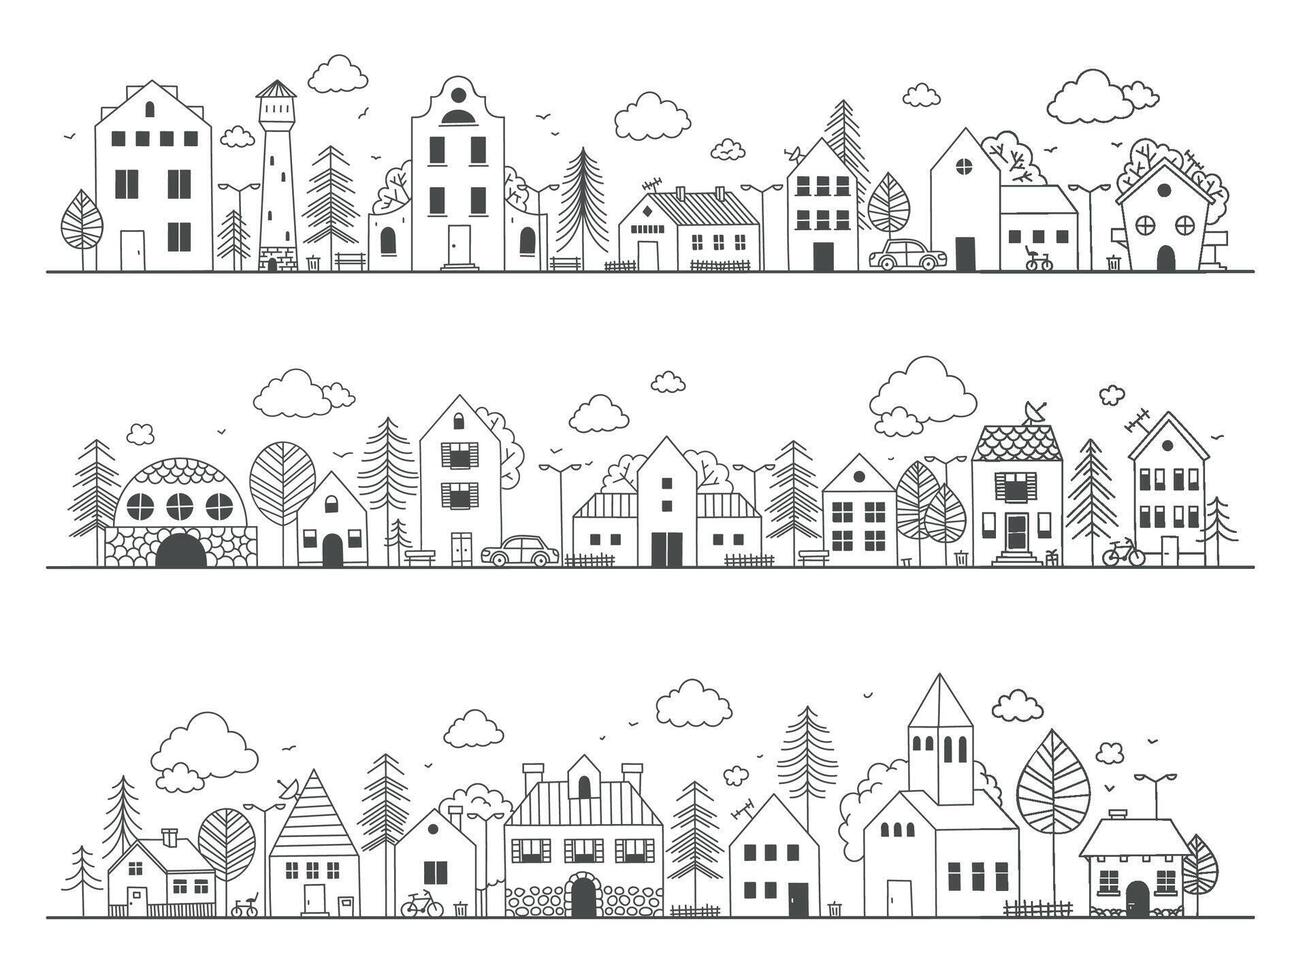 Doodle town street. Cute rural buildings with trees, hand drawn country neighborhood sketch with little houses. Vector childish scene